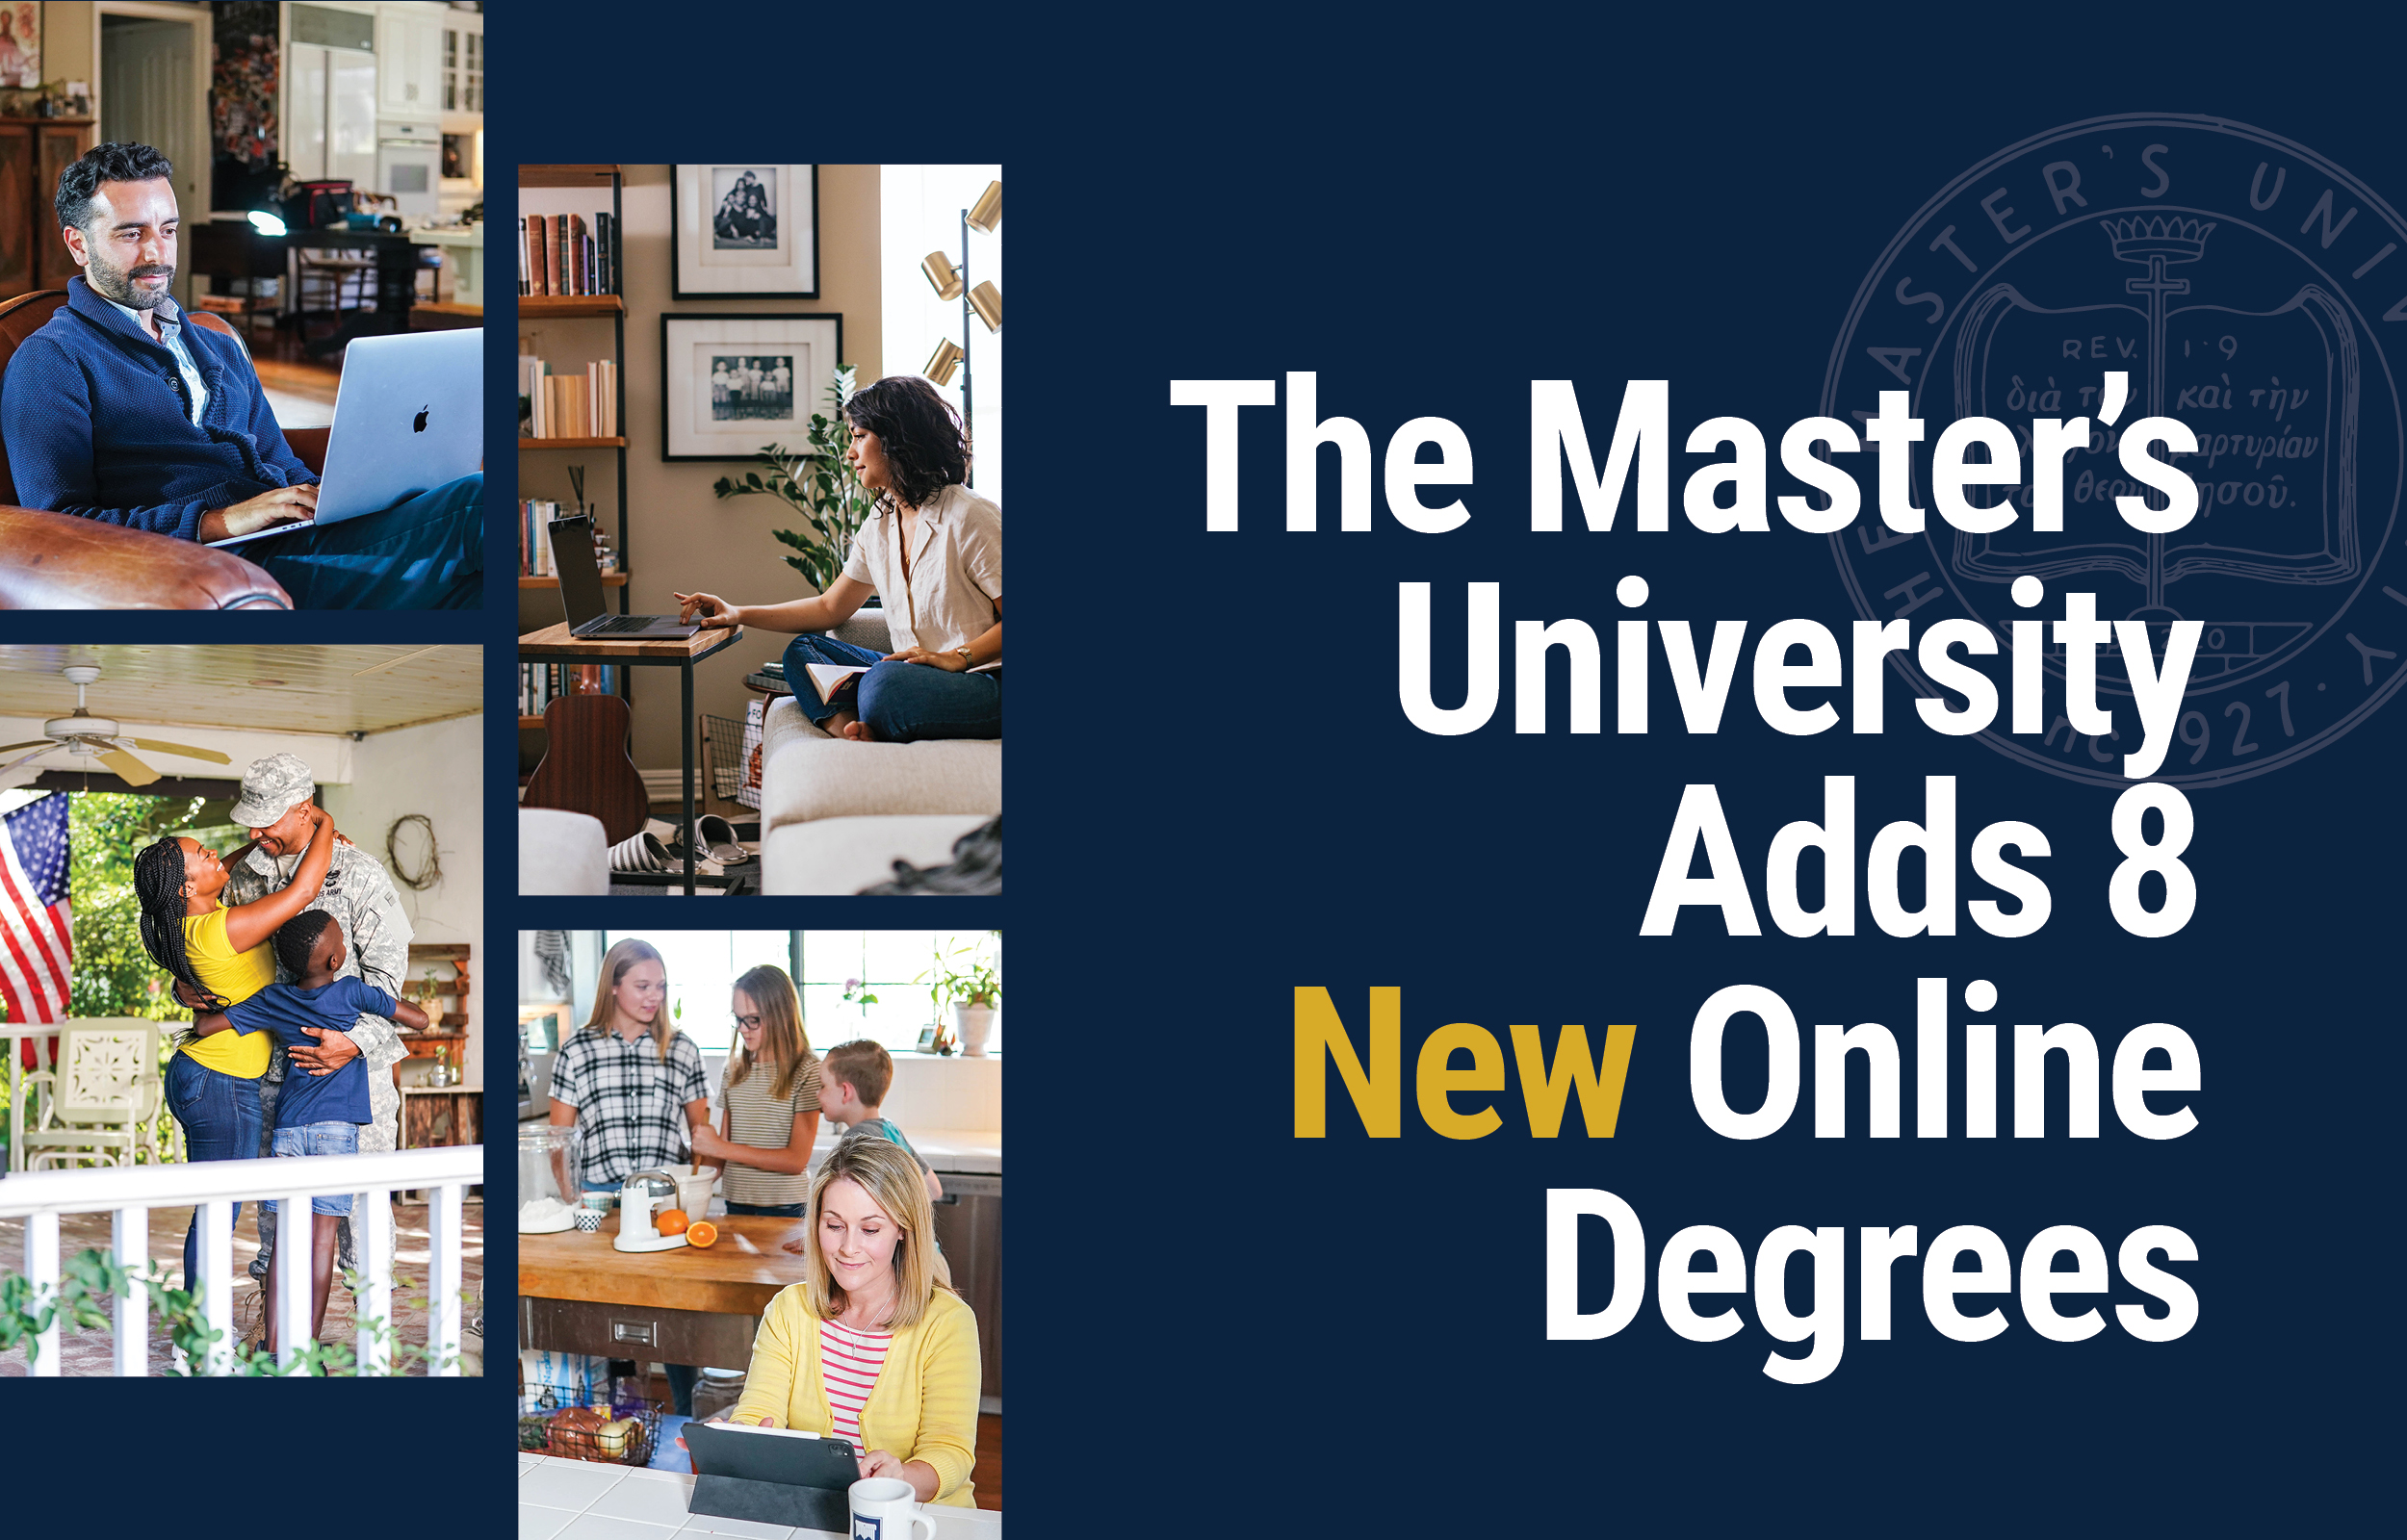 TMU Adds 8 New Online Degrees Featured Image